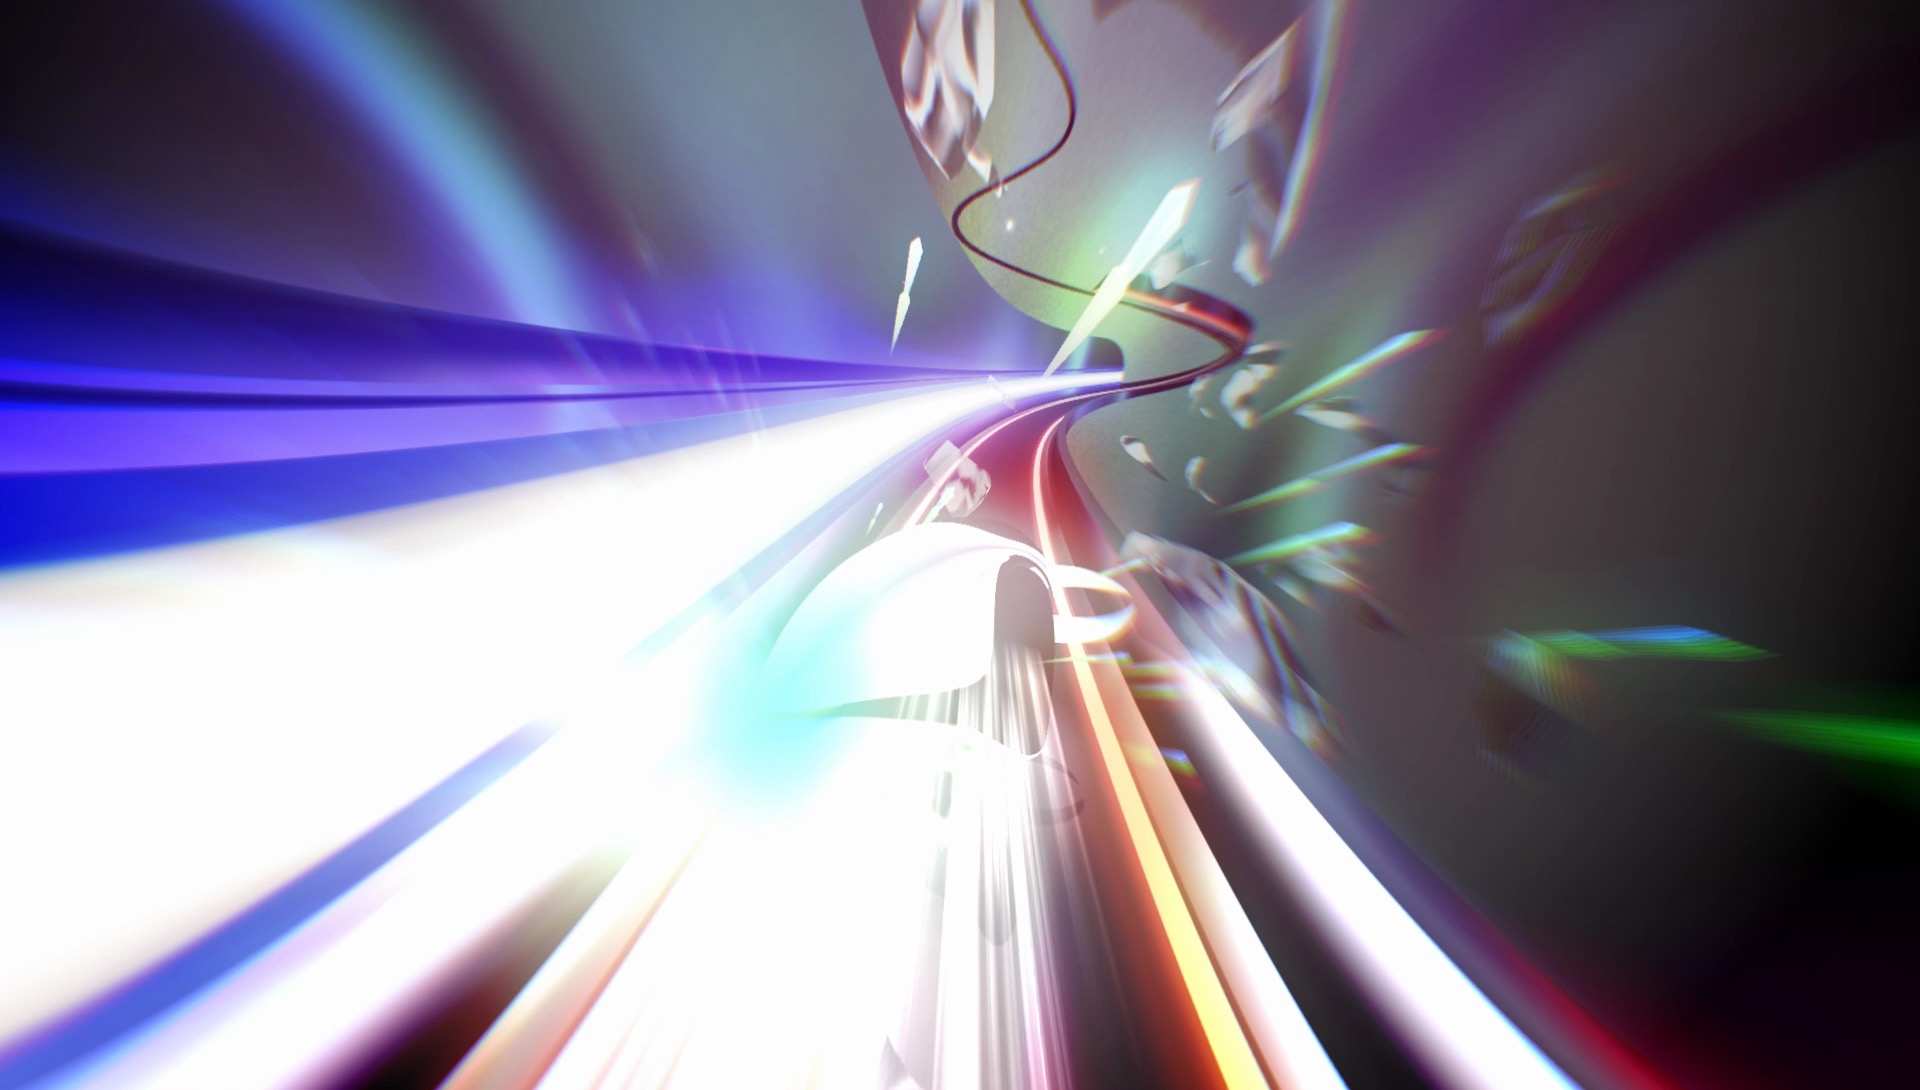 A screenshot of Thumper, showing strange and colourful shapes in a dark space